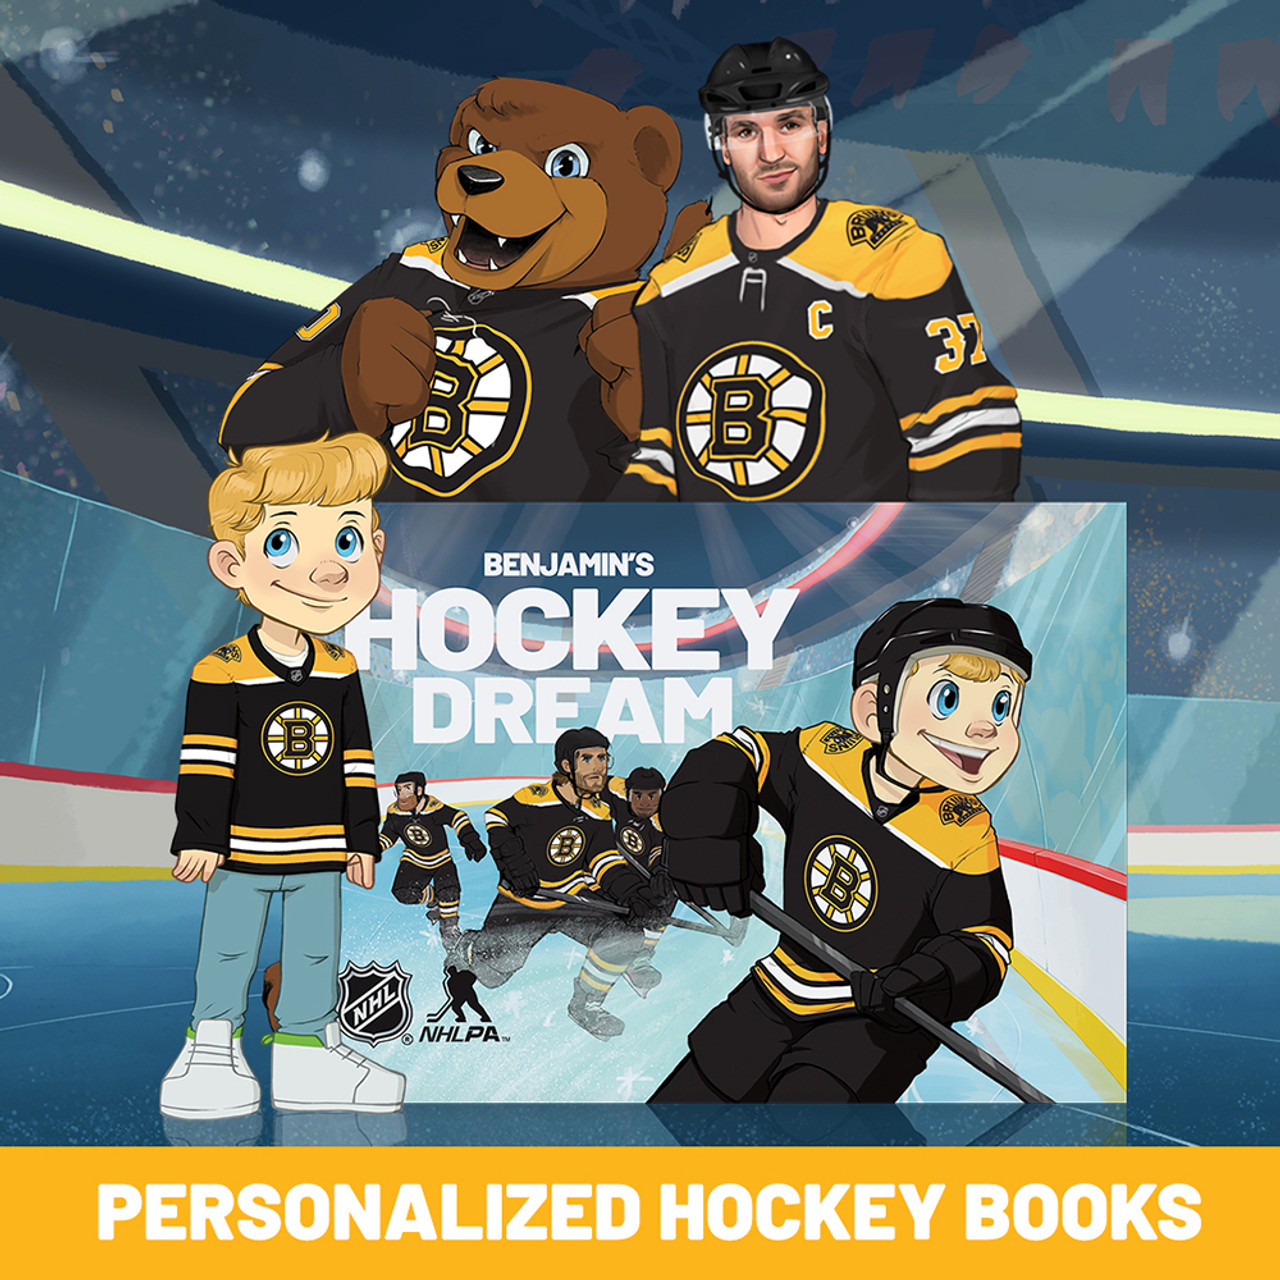 Brad Marchand: The Unlikely Star: Croucher, Philip: 9781771086851